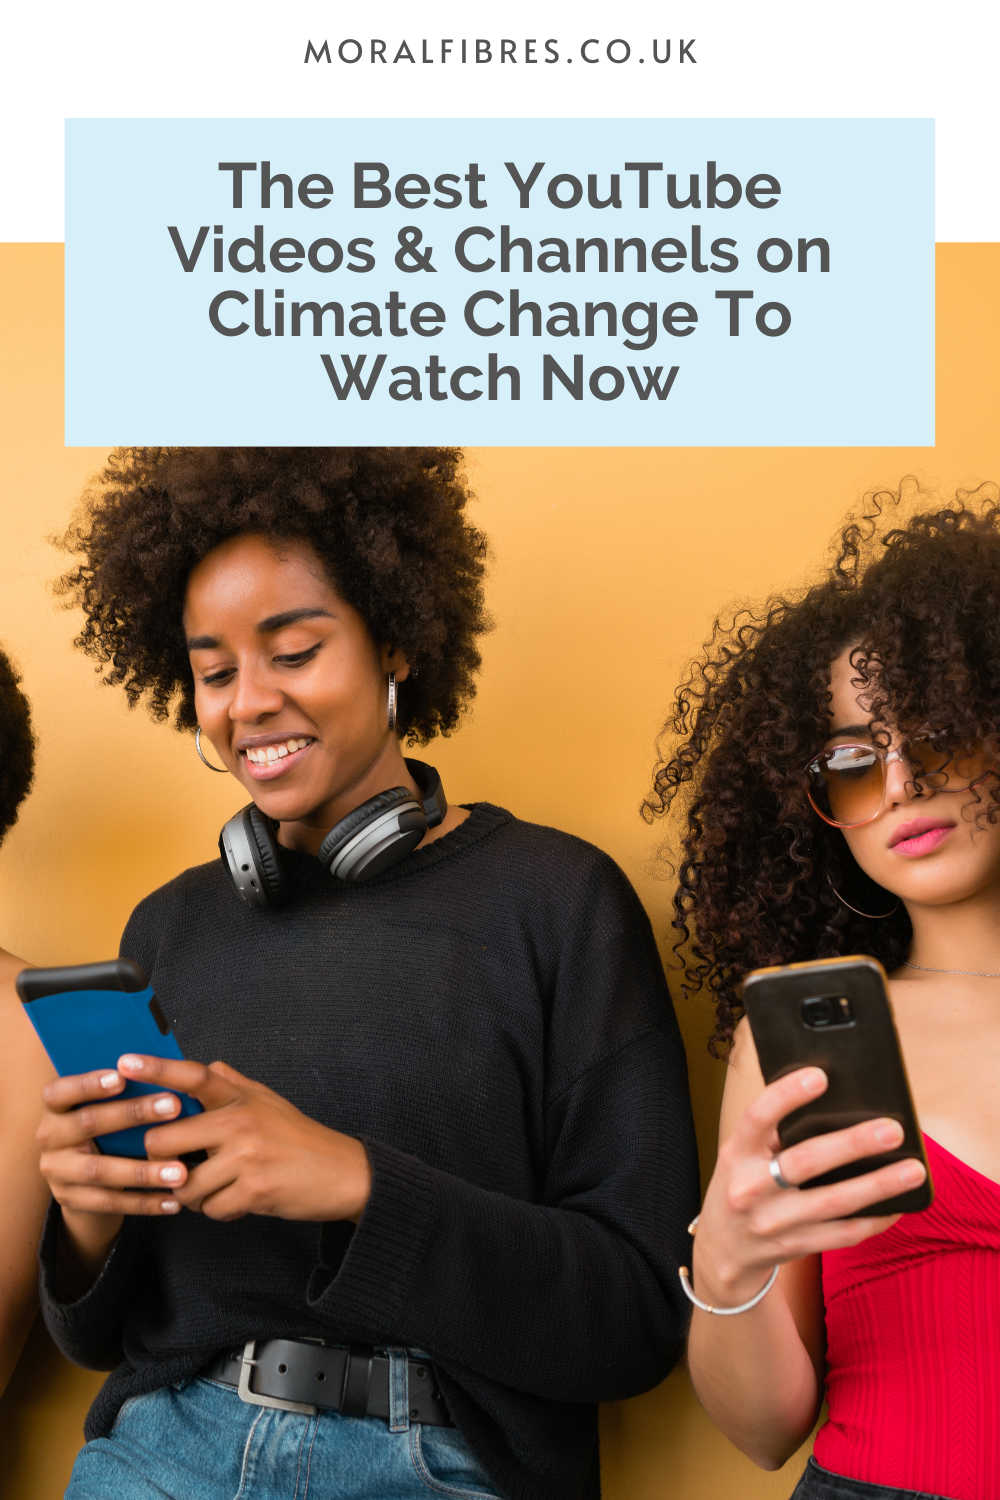 Two people watching videos on their phones against a yellow background, with a blue text box that reads the best YouTube videos and channels on climate change to watch now.